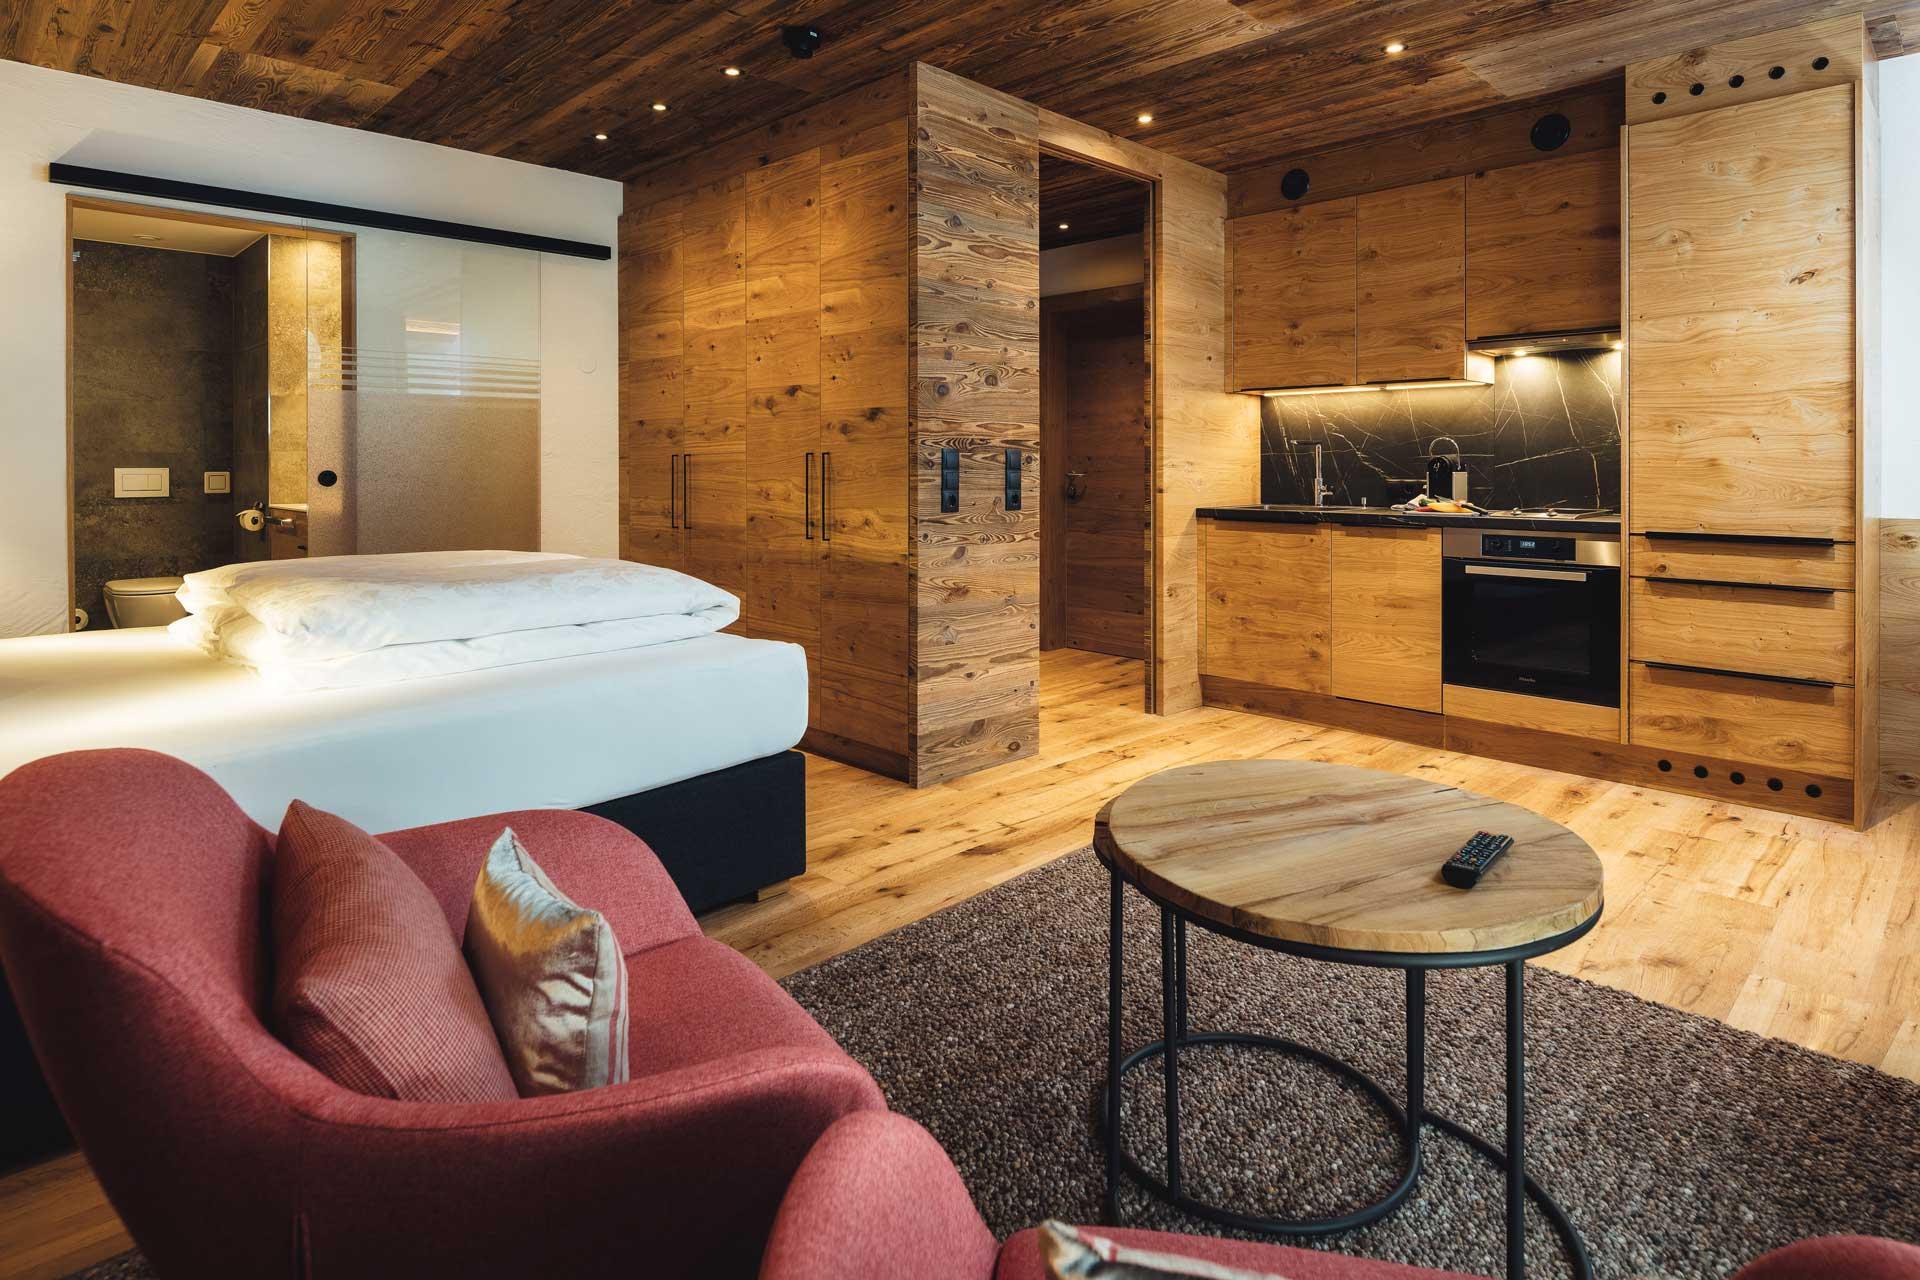 Ski-In, Ski-Out Paradise: Luxury Chalets in the Swiss Alps with Direct Access to Slopes